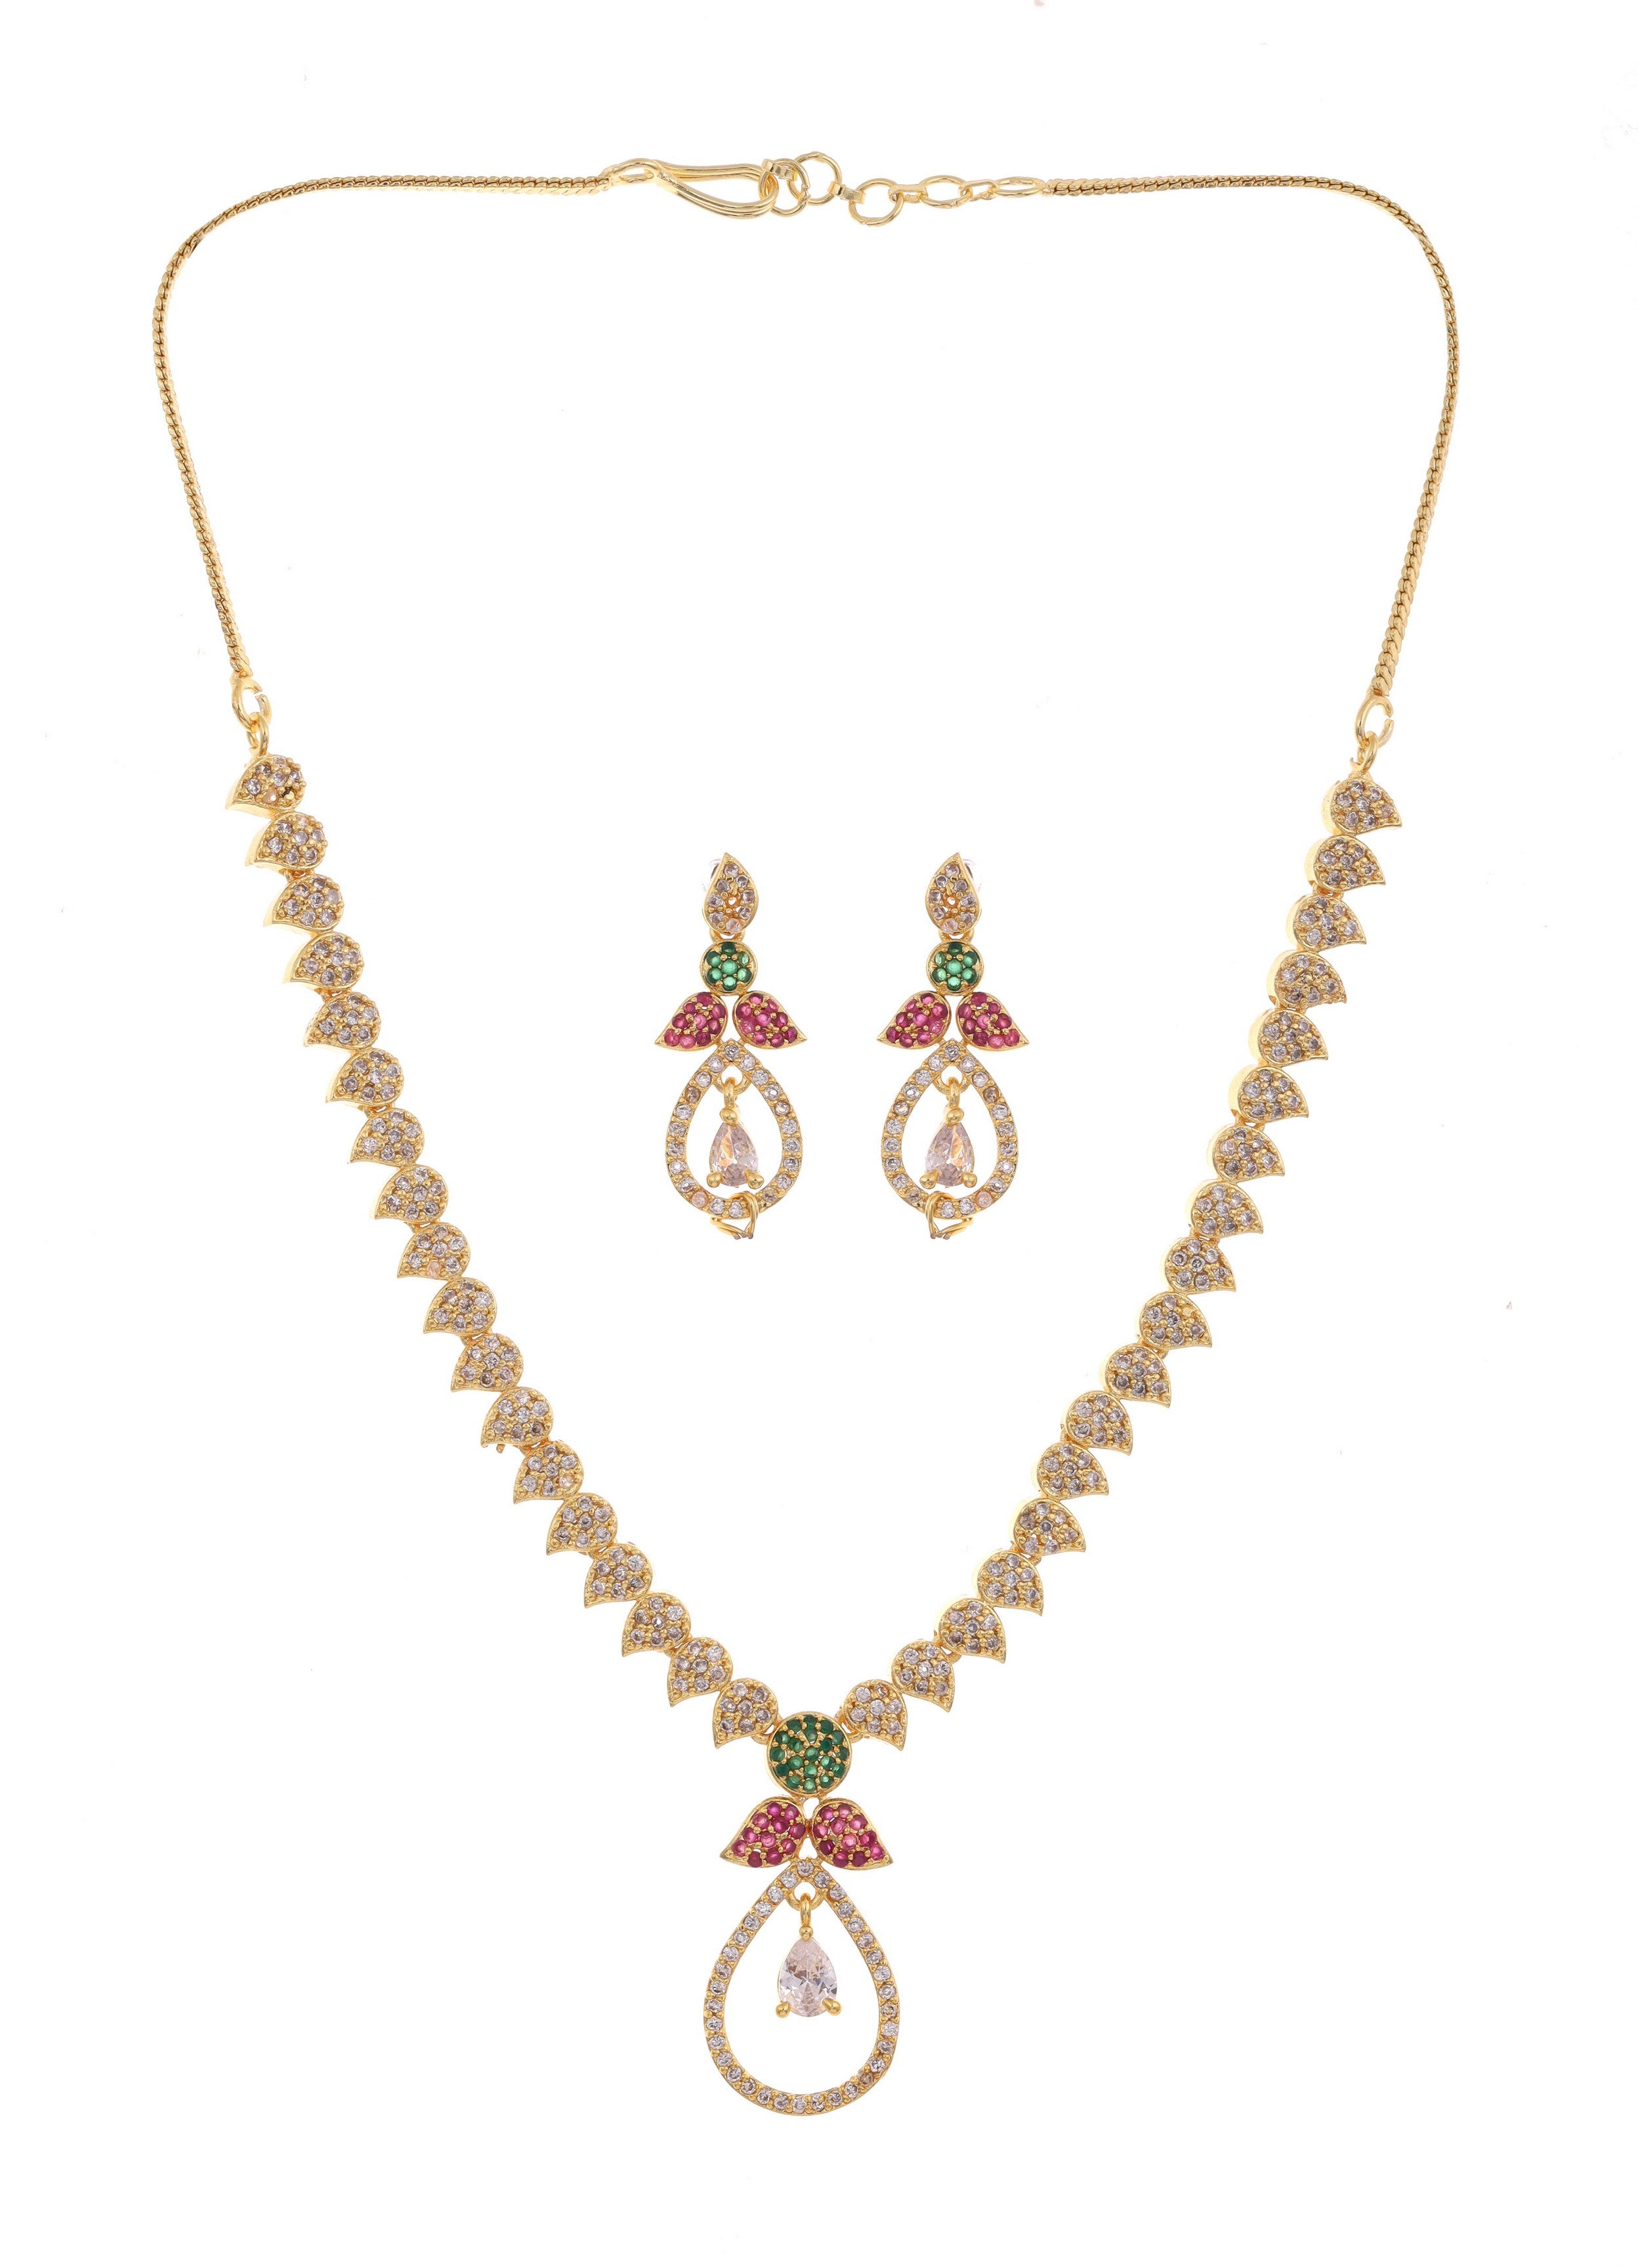 Rhodium Plated Multi Color Cubic Zircons with Tear Drop Studded Necklace Set.